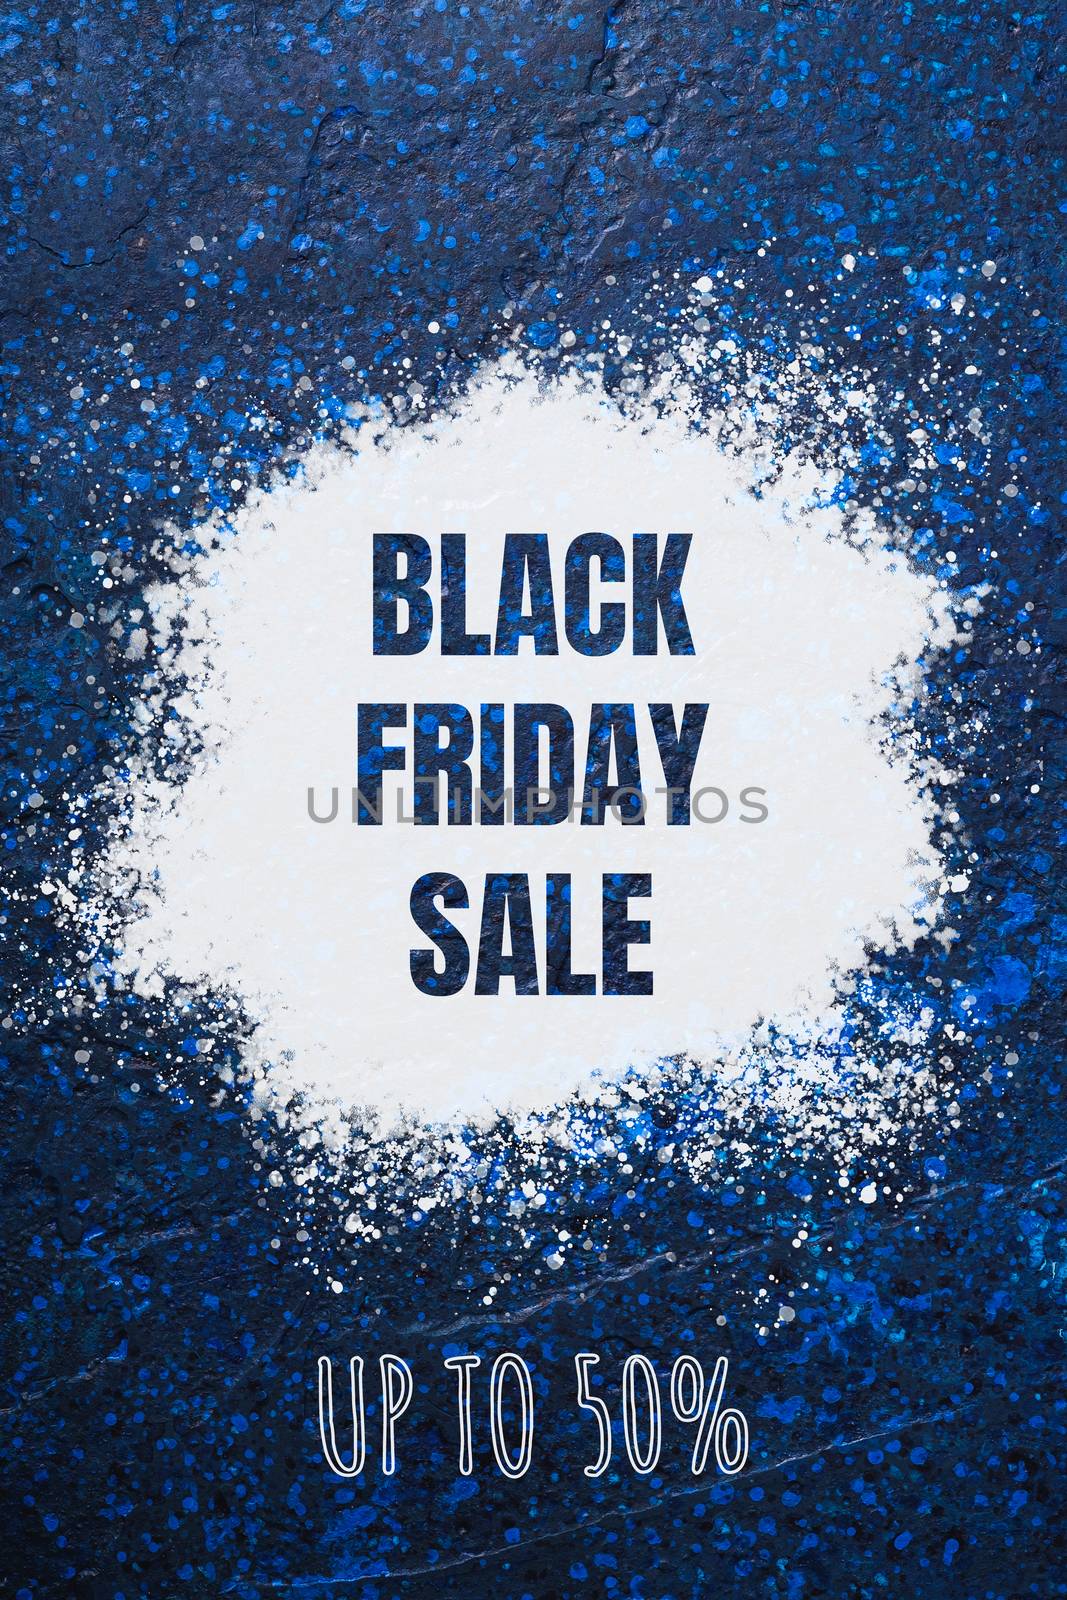 Black Friday sale banner with text up to 50 percent off discount on blue abstract textured background